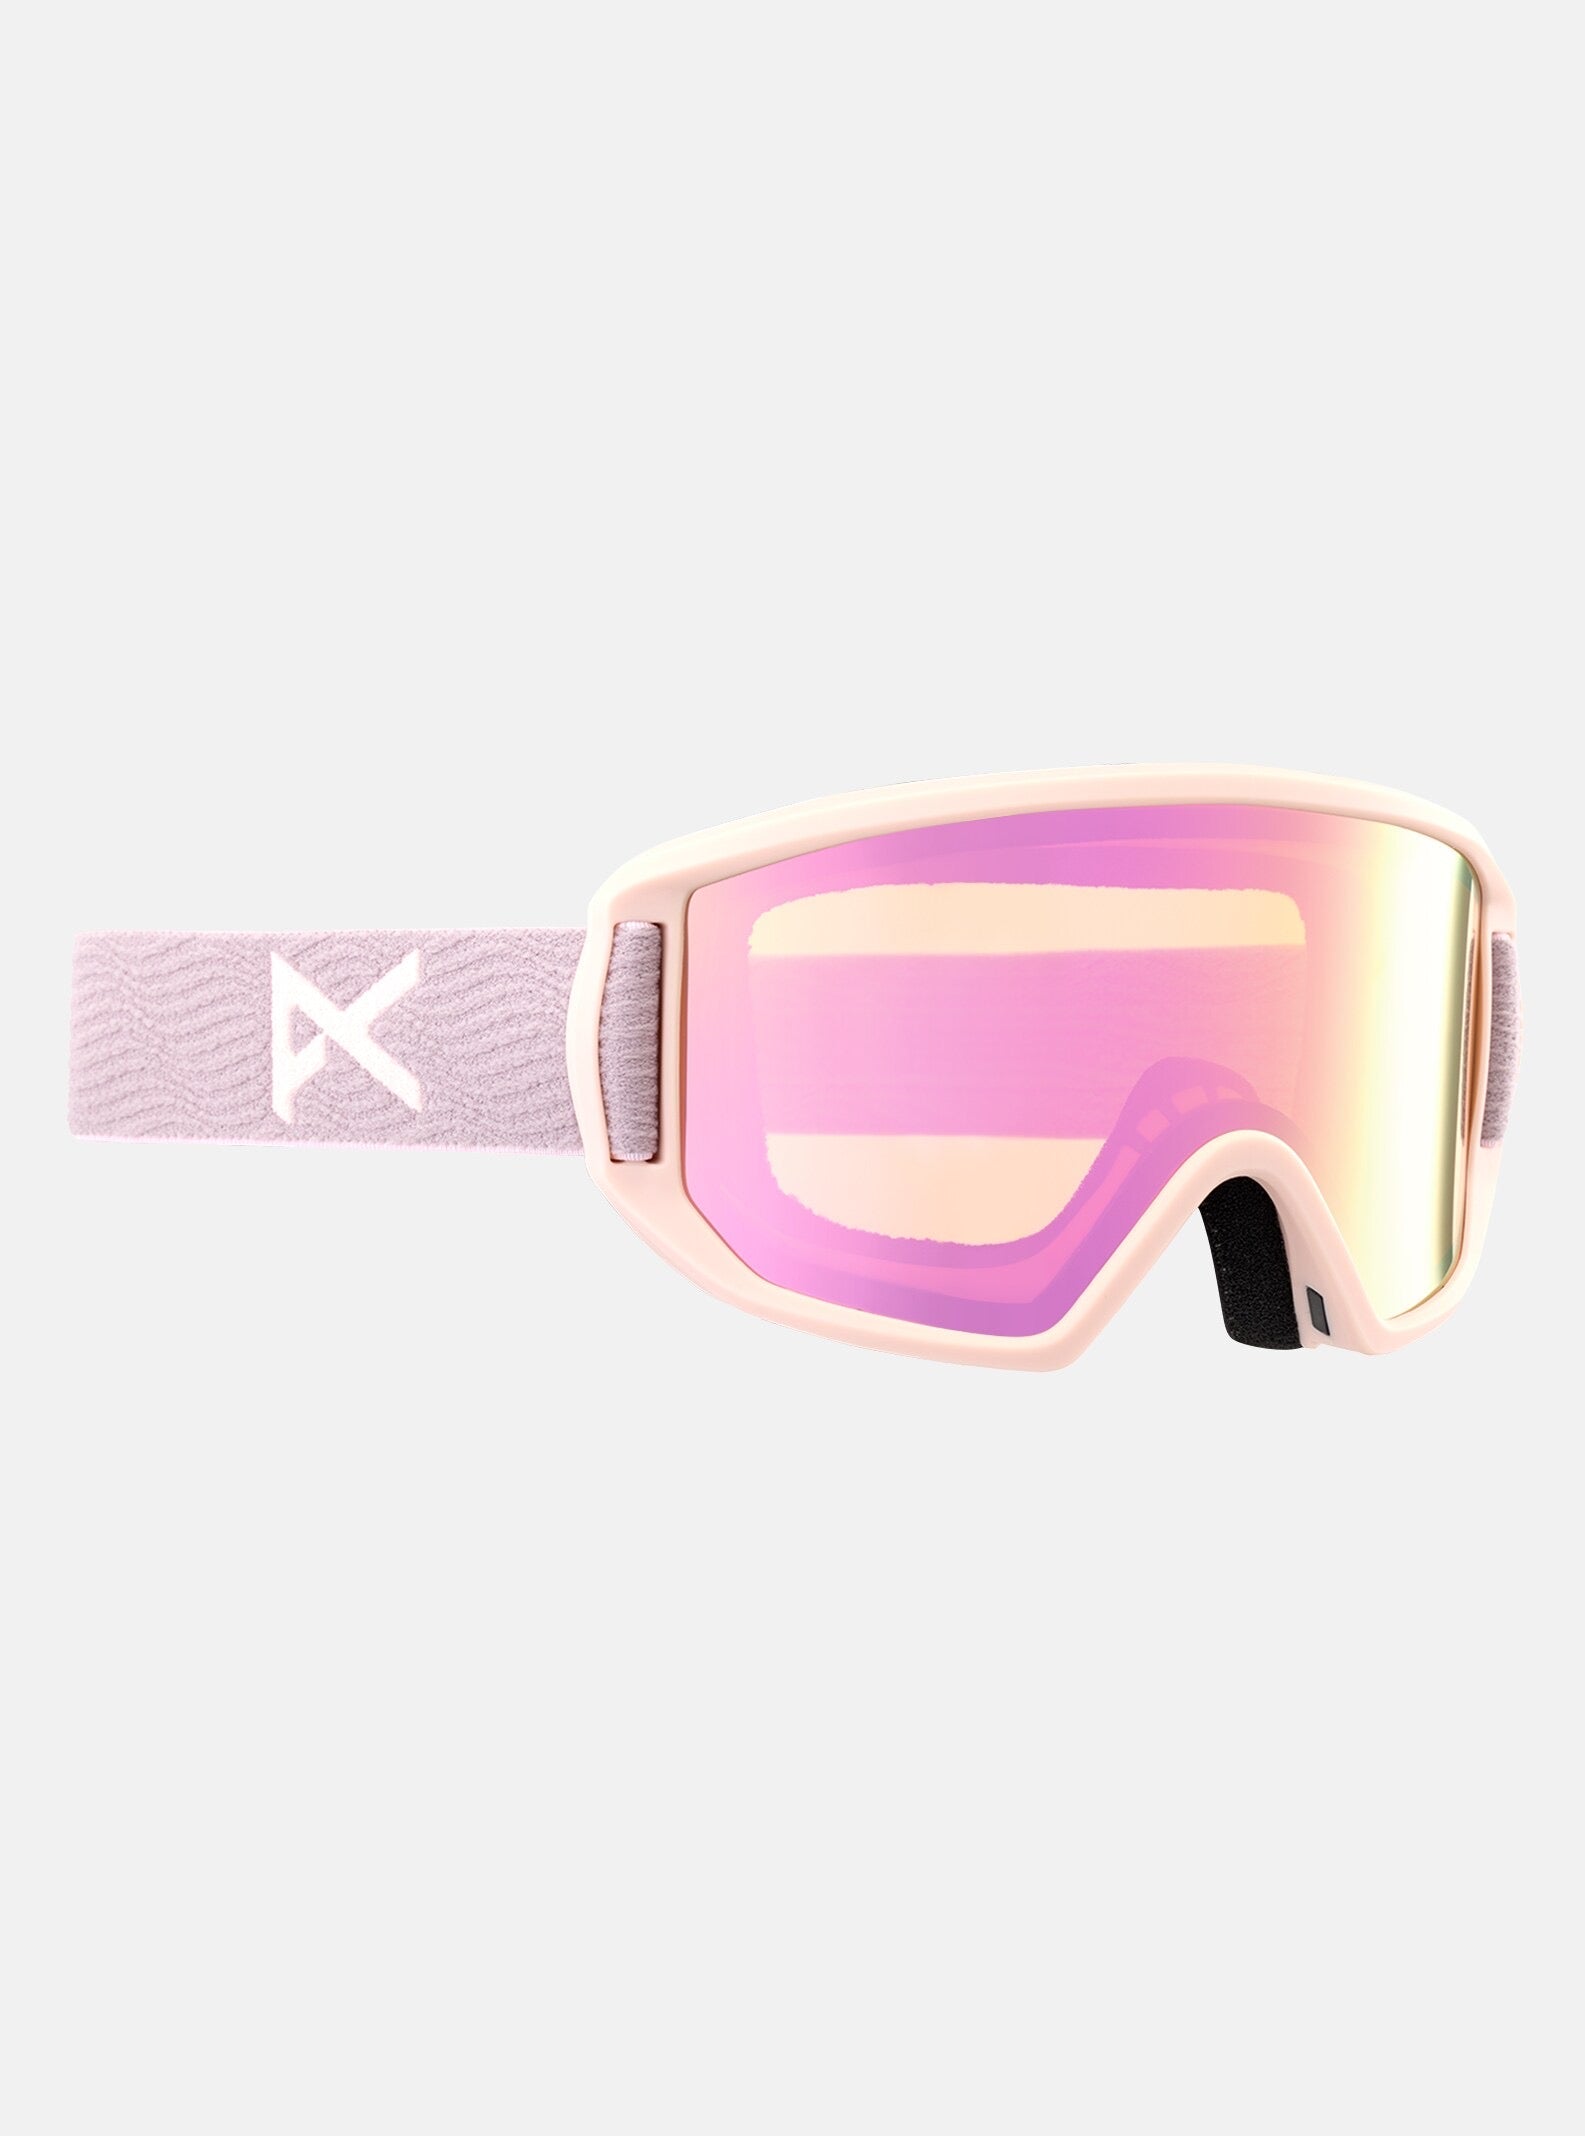 Relapse Jr. Goggles (no MFI)